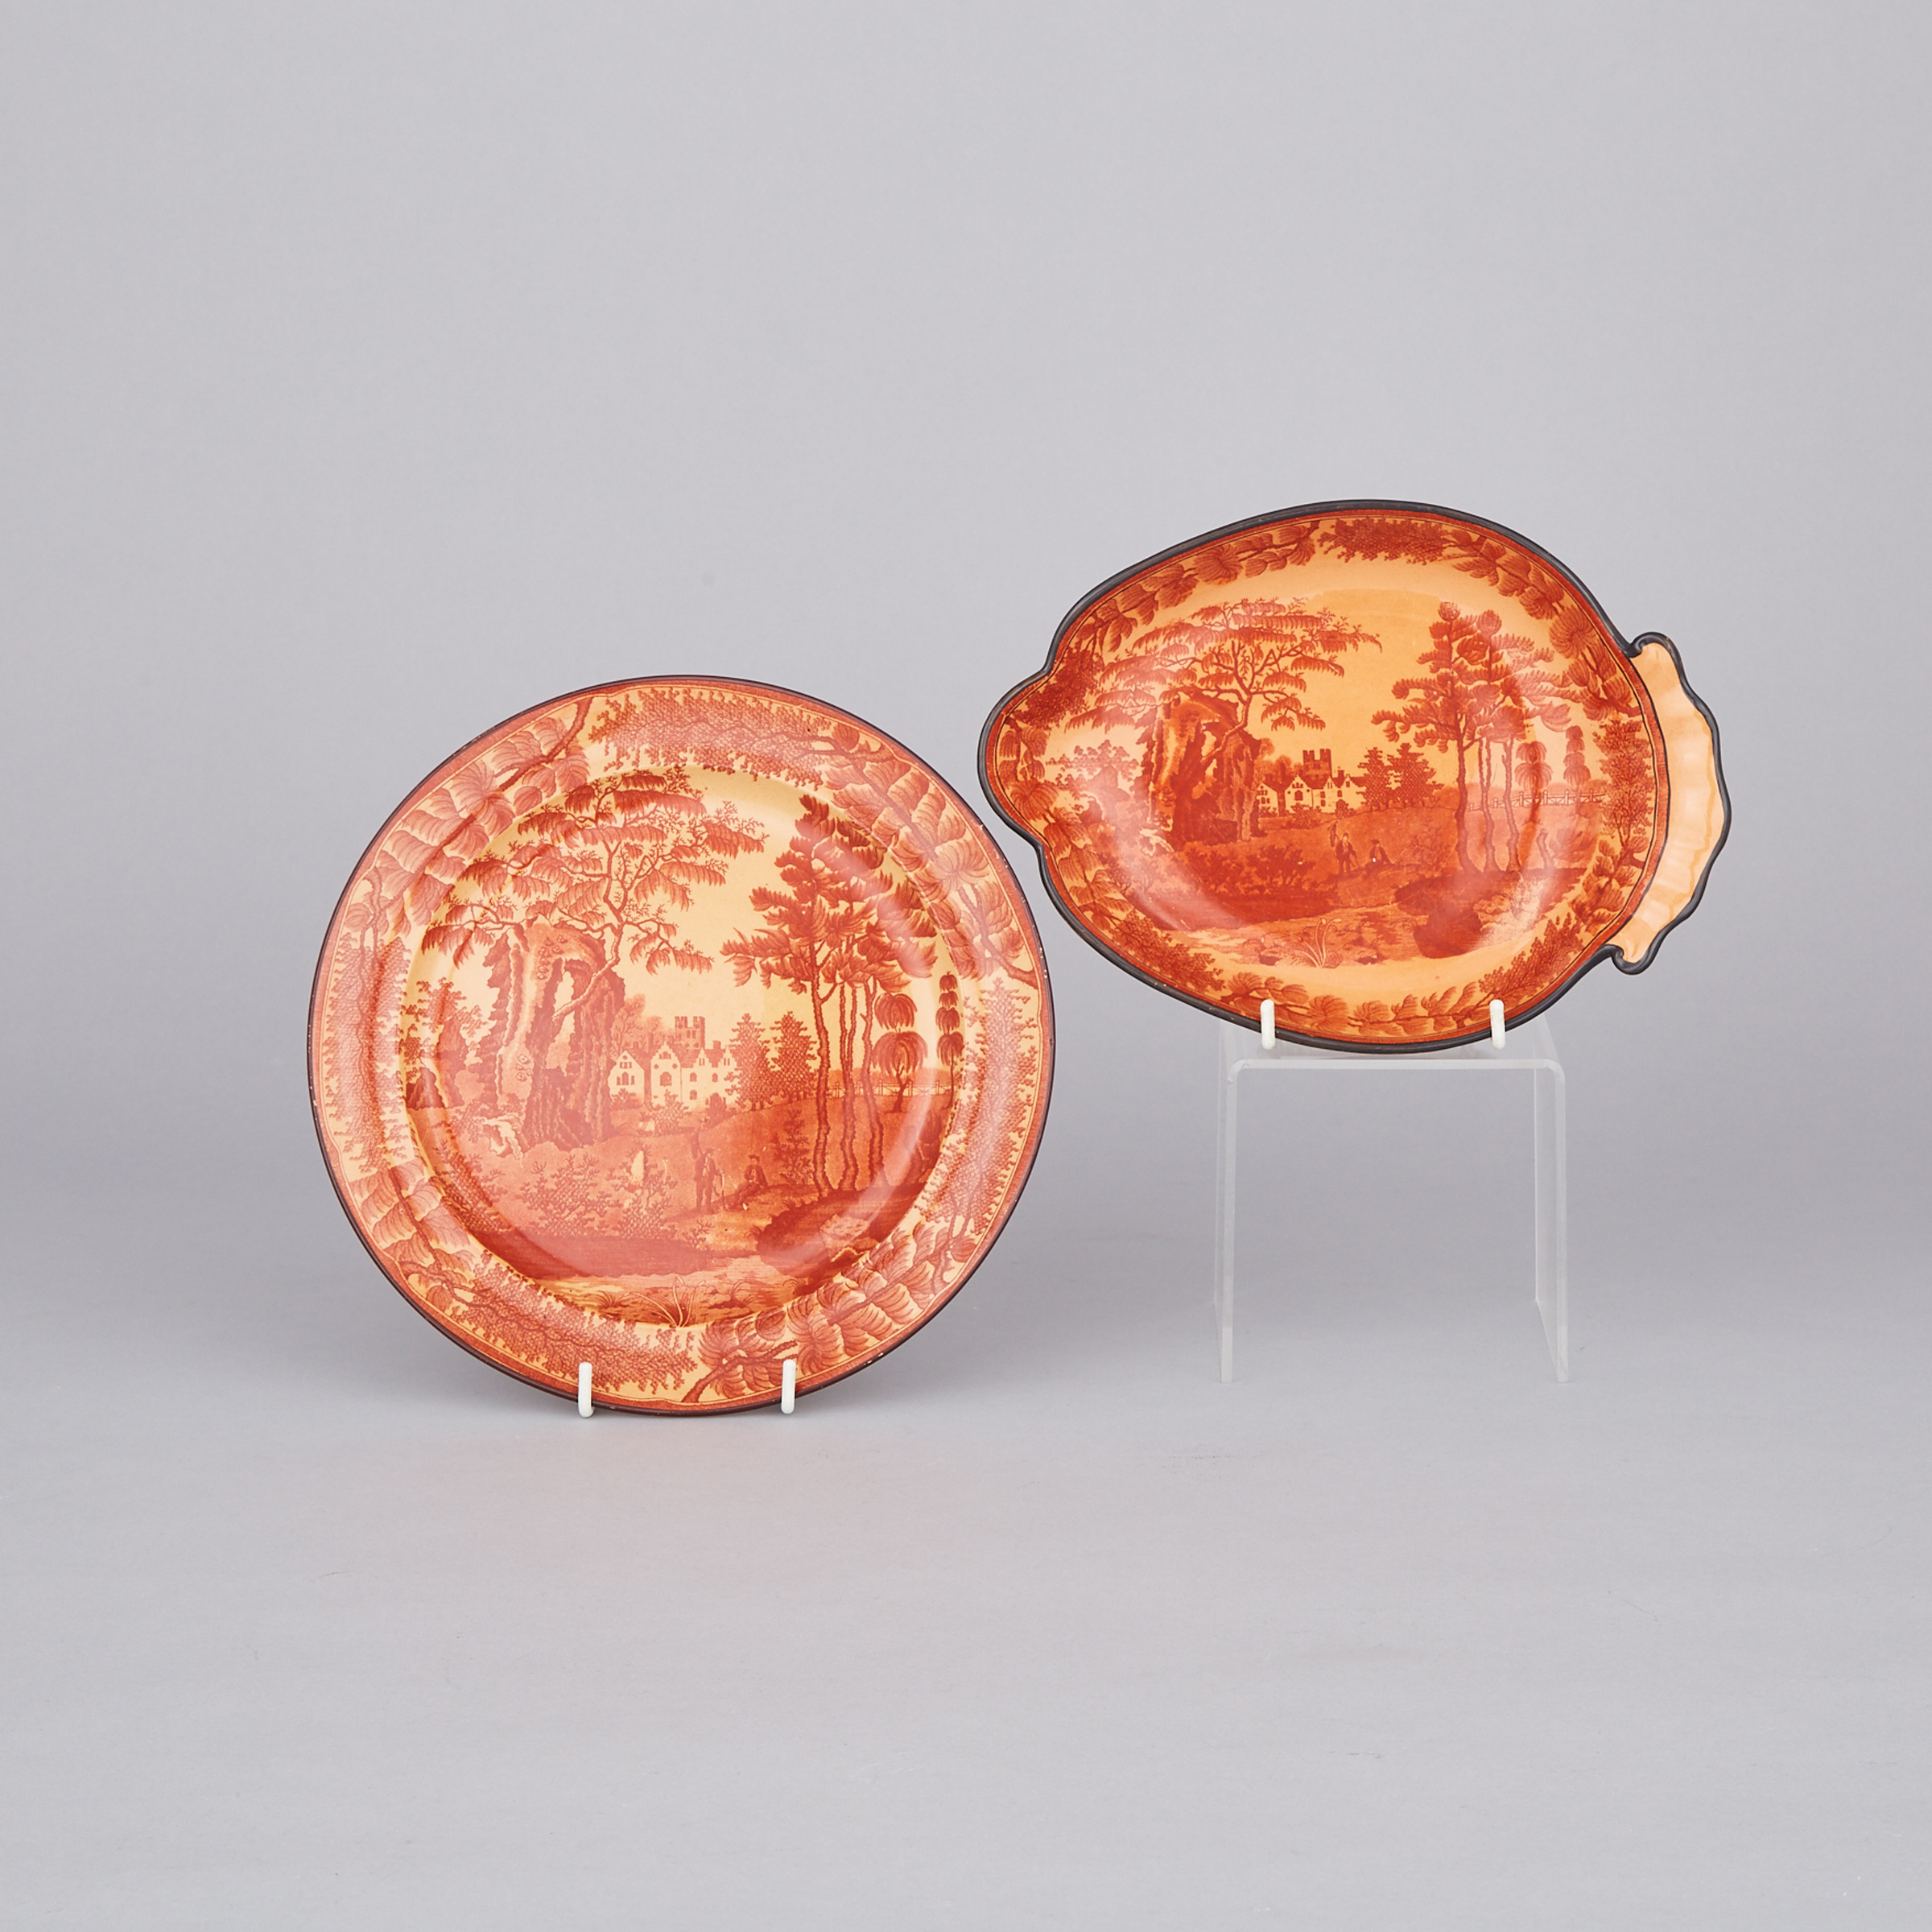 Davenport Red-Printed ‘Bisham Abbey’ Pattern Chalcedony Plate and Oval Dish, c.1810